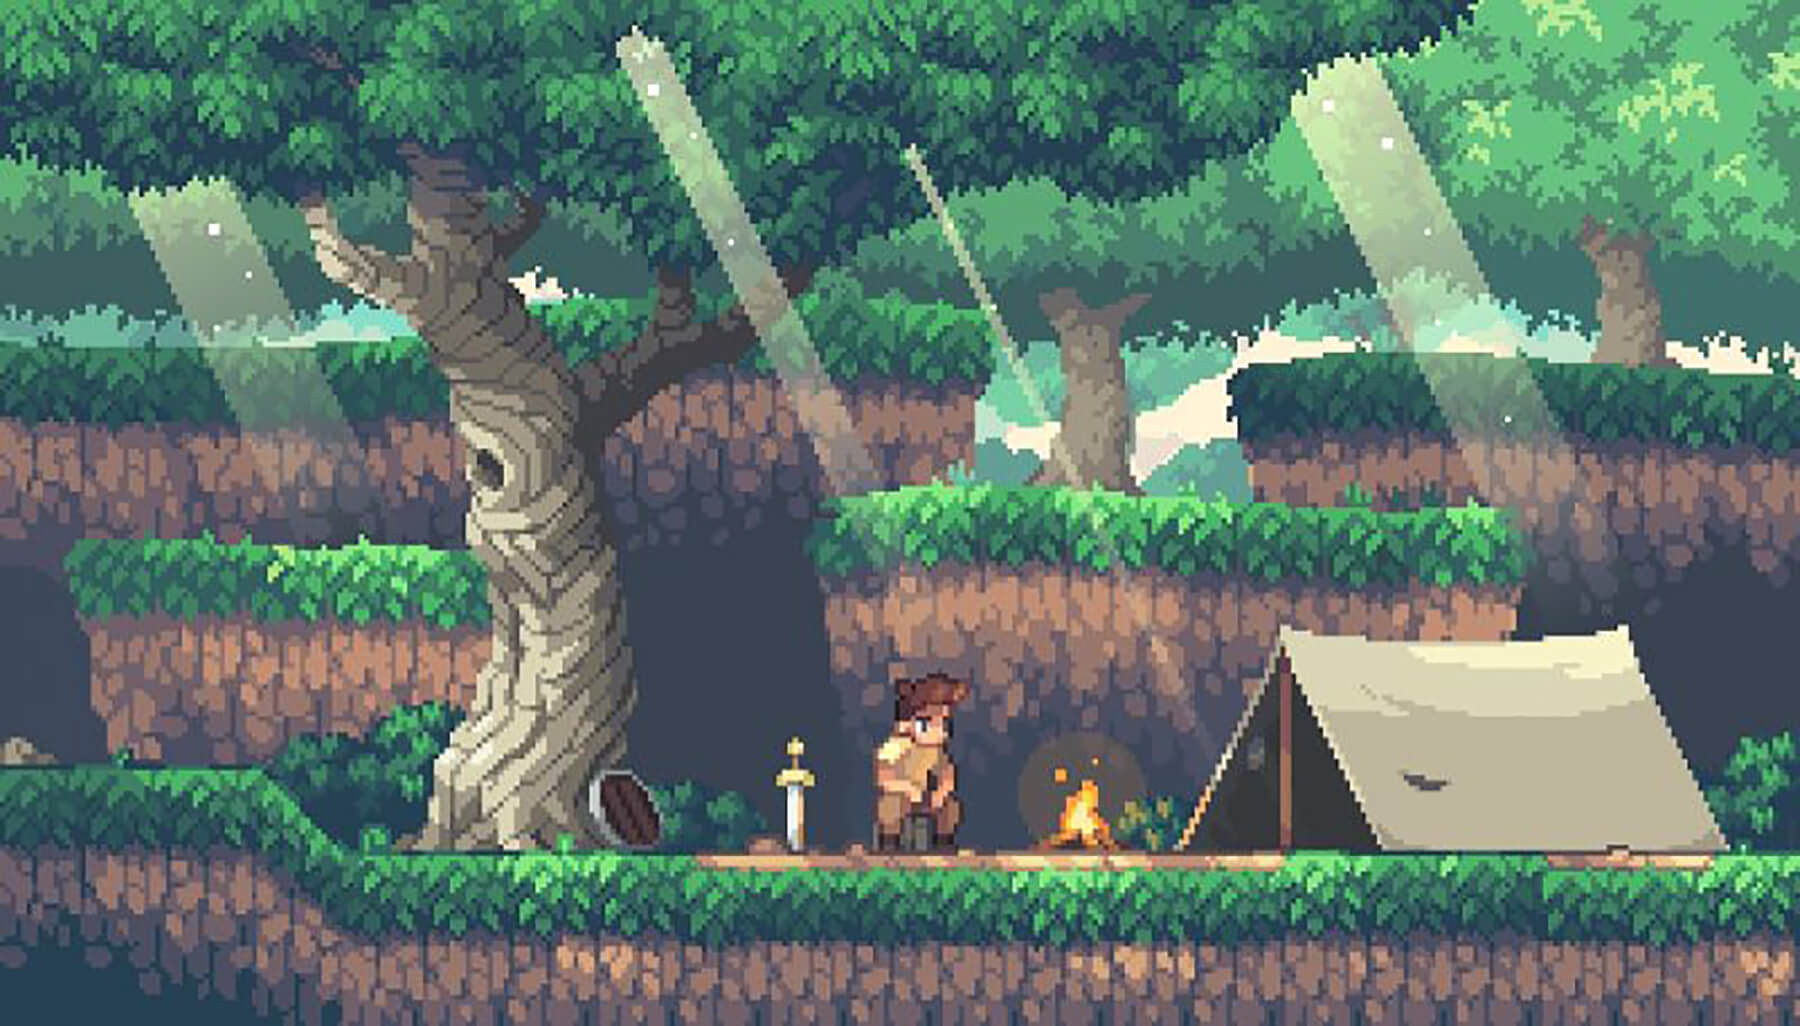 Pixel art of a young man in a forest campsite sitting next to a sword and shield, fire, and tent.